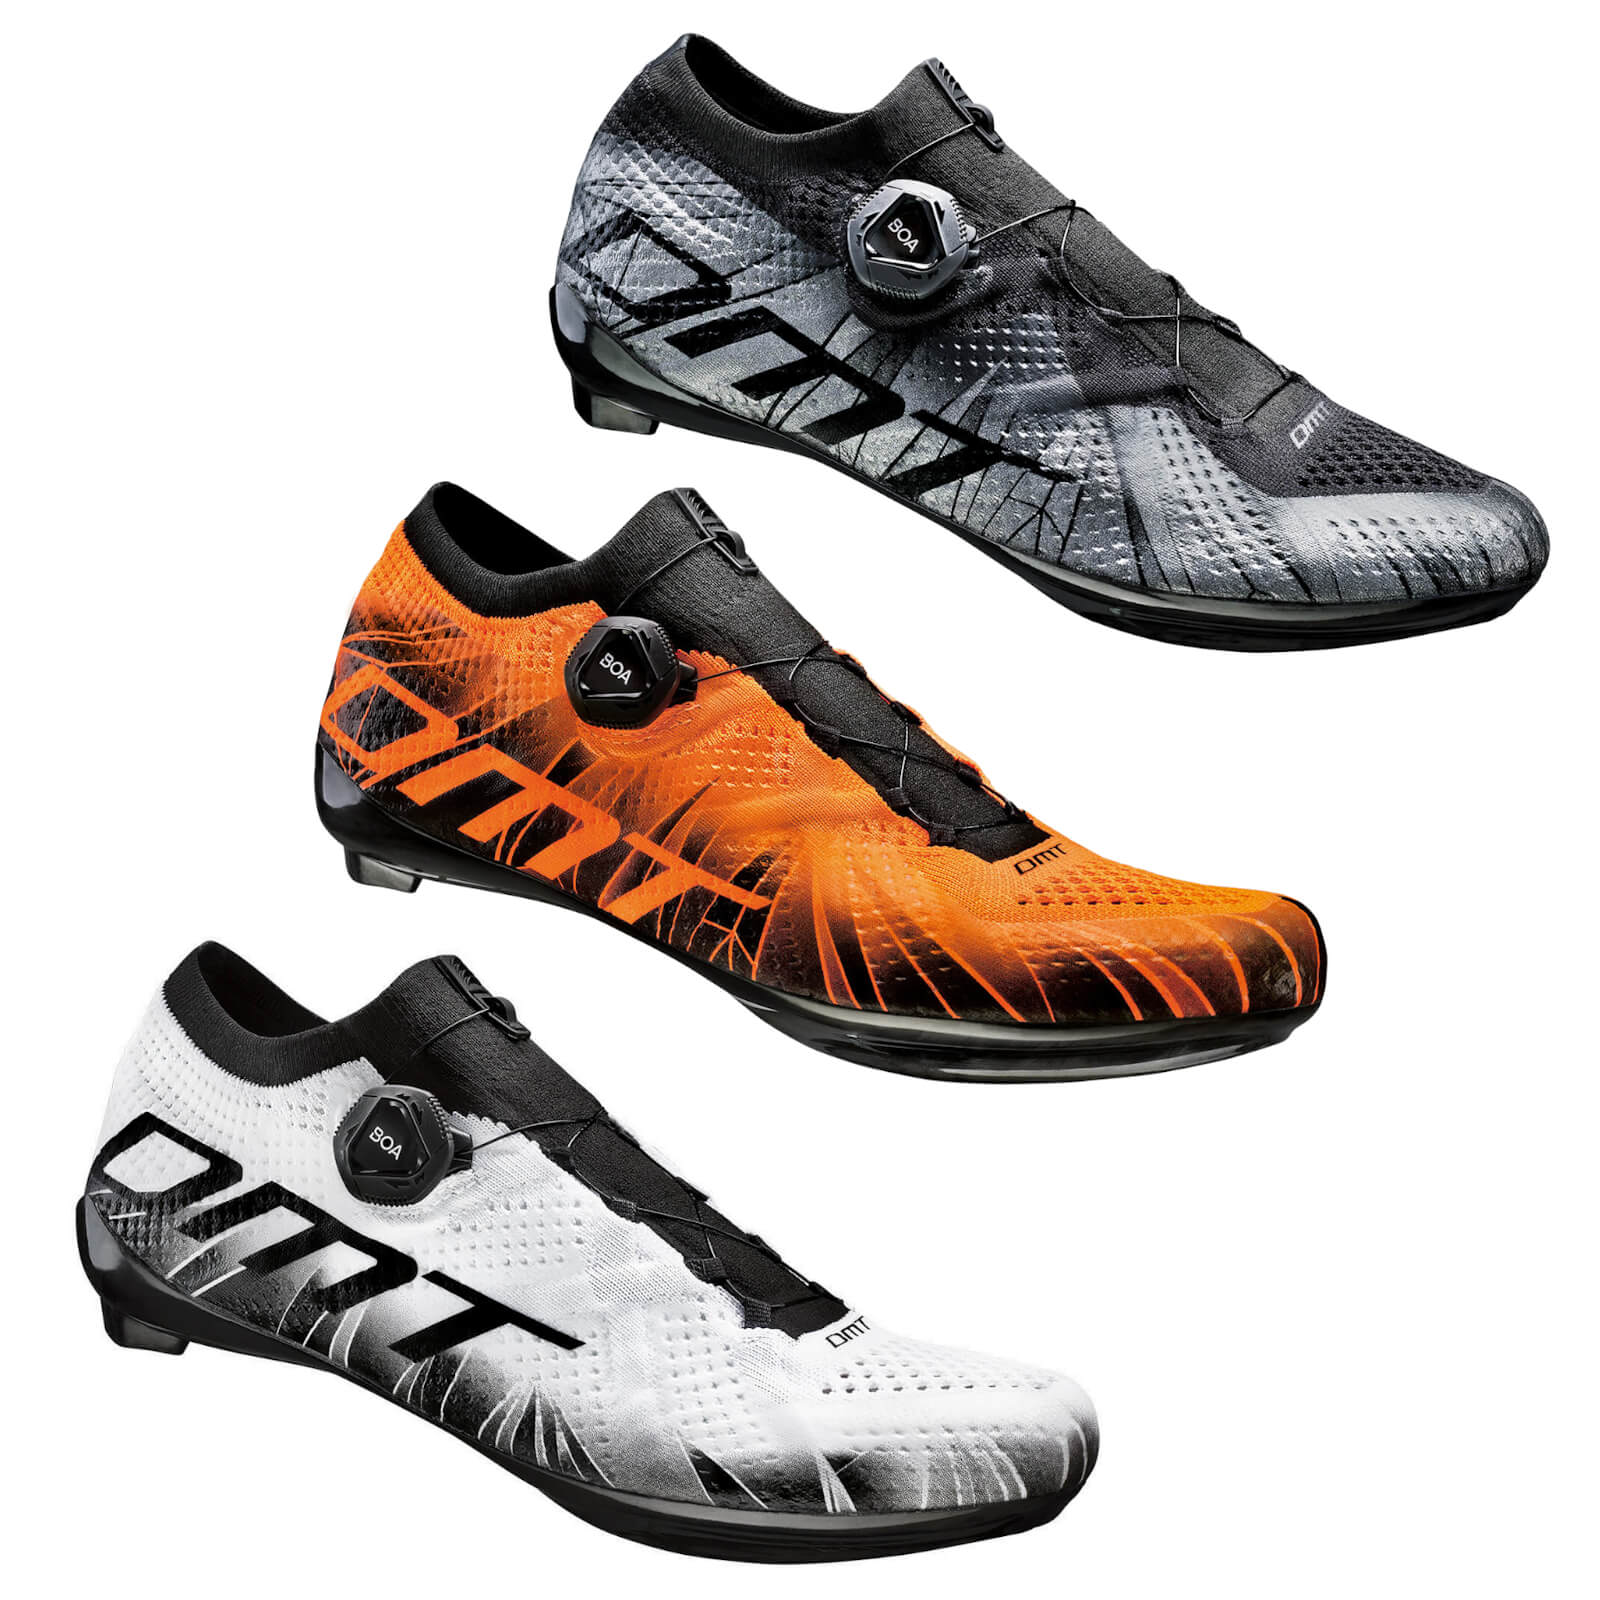 dmt road cycling shoes